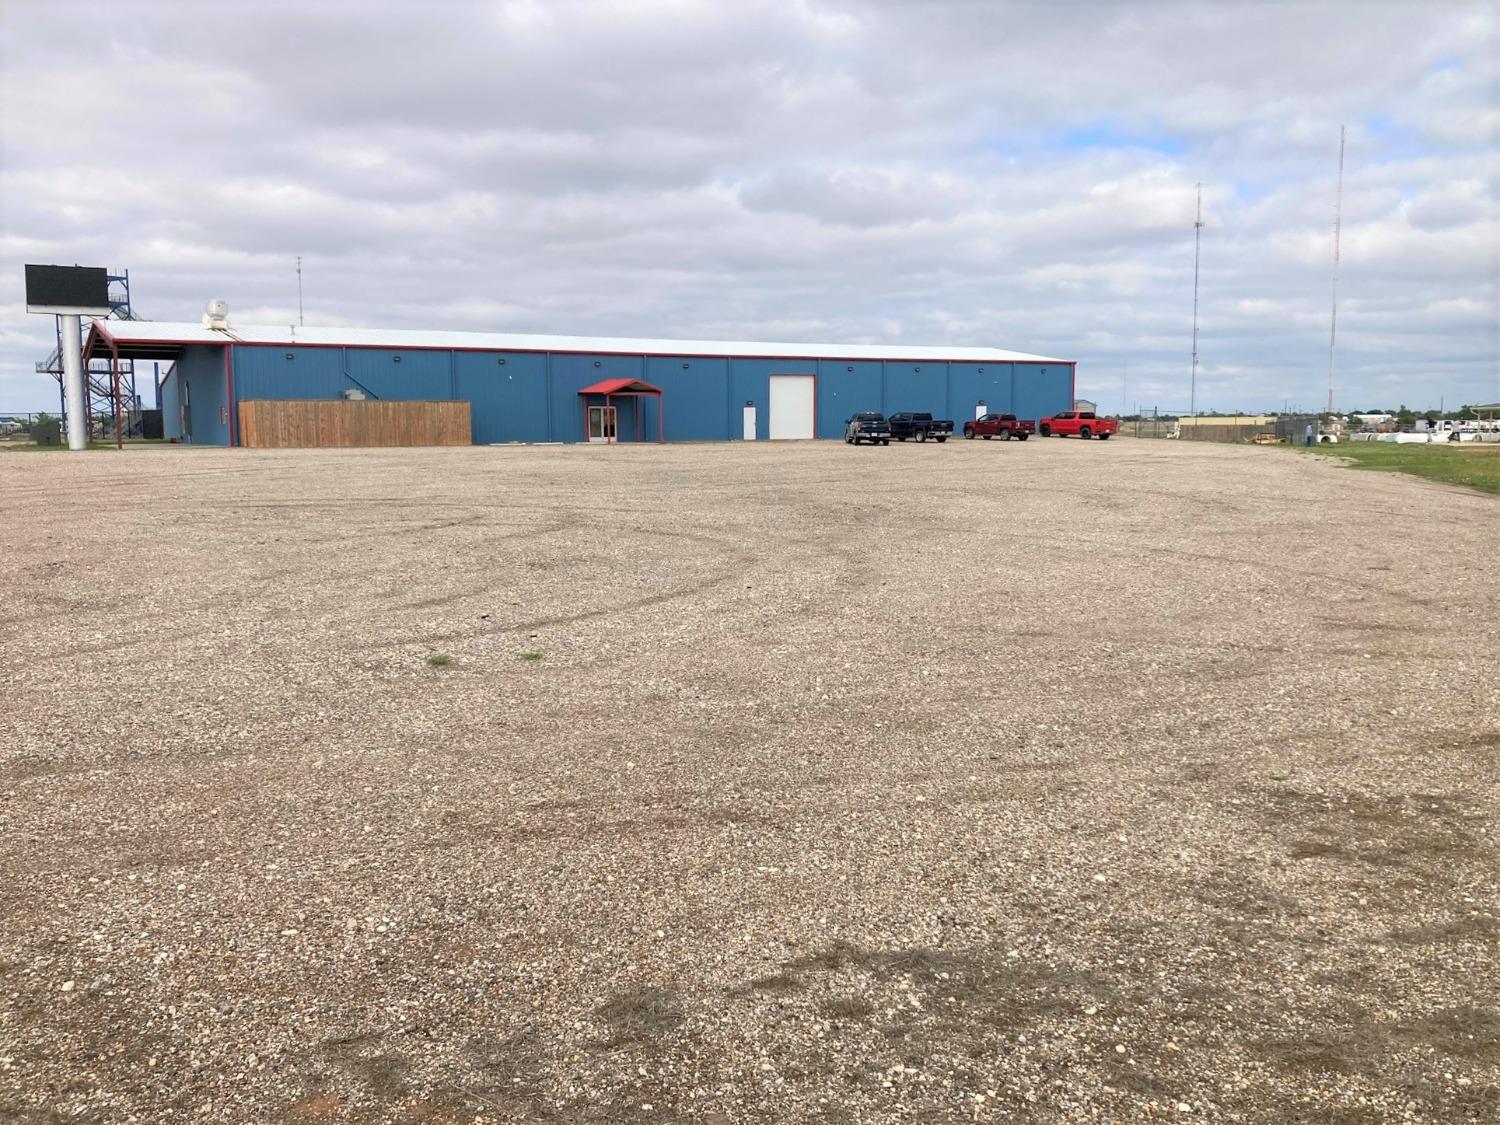 PRICE REDUCED $400,000!!! Location! Location! Location! Property on Interstate 27! 13.97 acres of land. Like new 18,000 sq. ft. of covered building space. Thousands of sq. ft. of nice smooth concrete! Endless possibilities for this property. Extremely high traffic count every day! ORIGINAL PRICE was $2,200,000! Reduced to $1,895,000 on May 19, 2023; reduced to $1,695,000 on July 17, 2023; and NOW $1,495,000!